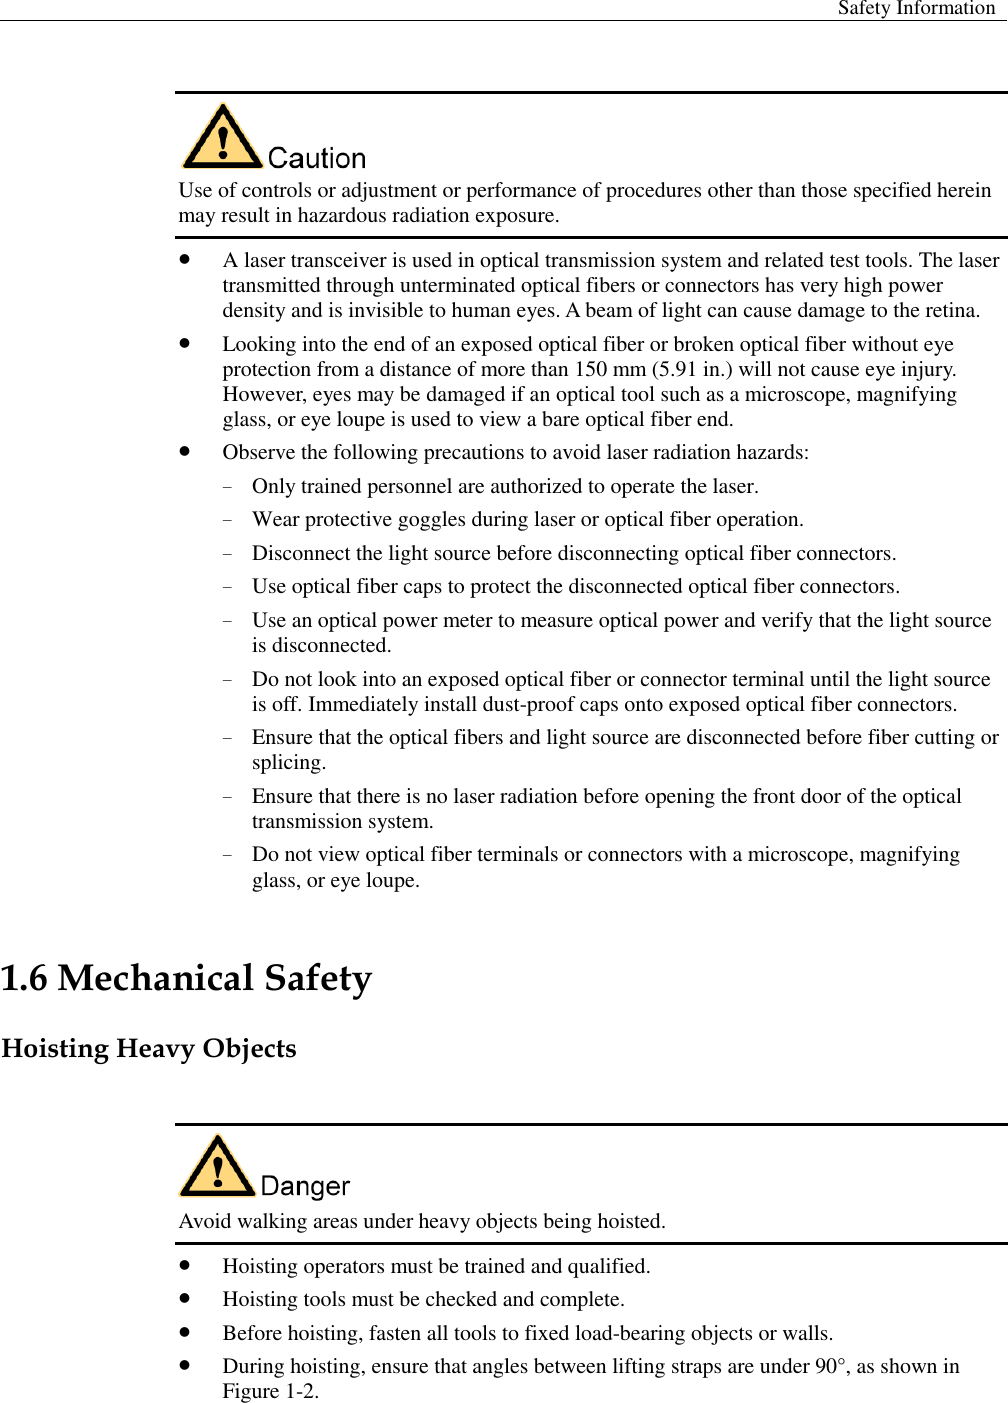  Safety Information    Use of controls or adjustment or performance of procedures other than those specified herein may result in hazardous radiation exposure.    A laser transceiver is used in optical transmission system and related test tools. The laser transmitted through unterminated optical fibers or connectors has very high power density and is invisible to human eyes. A beam of light can cause damage to the retina.  Looking into the end of an exposed optical fiber or broken optical fiber without eye protection from a distance of more than 150 mm (5.91 in.) will not cause eye injury. However, eyes may be damaged if an optical tool such as a microscope, magnifying glass, or eye loupe is used to view a bare optical fiber end.    Observe the following precautions to avoid laser radiation hazards:   − Only trained personnel are authorized to operate the laser.   − Wear protective goggles during laser or optical fiber operation.   − Disconnect the light source before disconnecting optical fiber connectors.   − Use optical fiber caps to protect the disconnected optical fiber connectors.   − Use an optical power meter to measure optical power and verify that the light source is disconnected.   − Do not look into an exposed optical fiber or connector terminal until the light source is off. Immediately install dust-proof caps onto exposed optical fiber connectors.   − Ensure that the optical fibers and light source are disconnected before fiber cutting or splicing. − Ensure that there is no laser radiation before opening the front door of the optical transmission system.   − Do not view optical fiber terminals or connectors with a microscope, magnifying glass, or eye loupe. 1.6 Mechanical Safety Hoisting Heavy Objects   Avoid walking areas under heavy objects being hoisted.    Hoisting operators must be trained and qualified.  Hoisting tools must be checked and complete.    Before hoisting, fasten all tools to fixed load-bearing objects or walls.    During hoisting, ensure that angles between lifting straps are under 90°, as shown in Figure 1-2.   